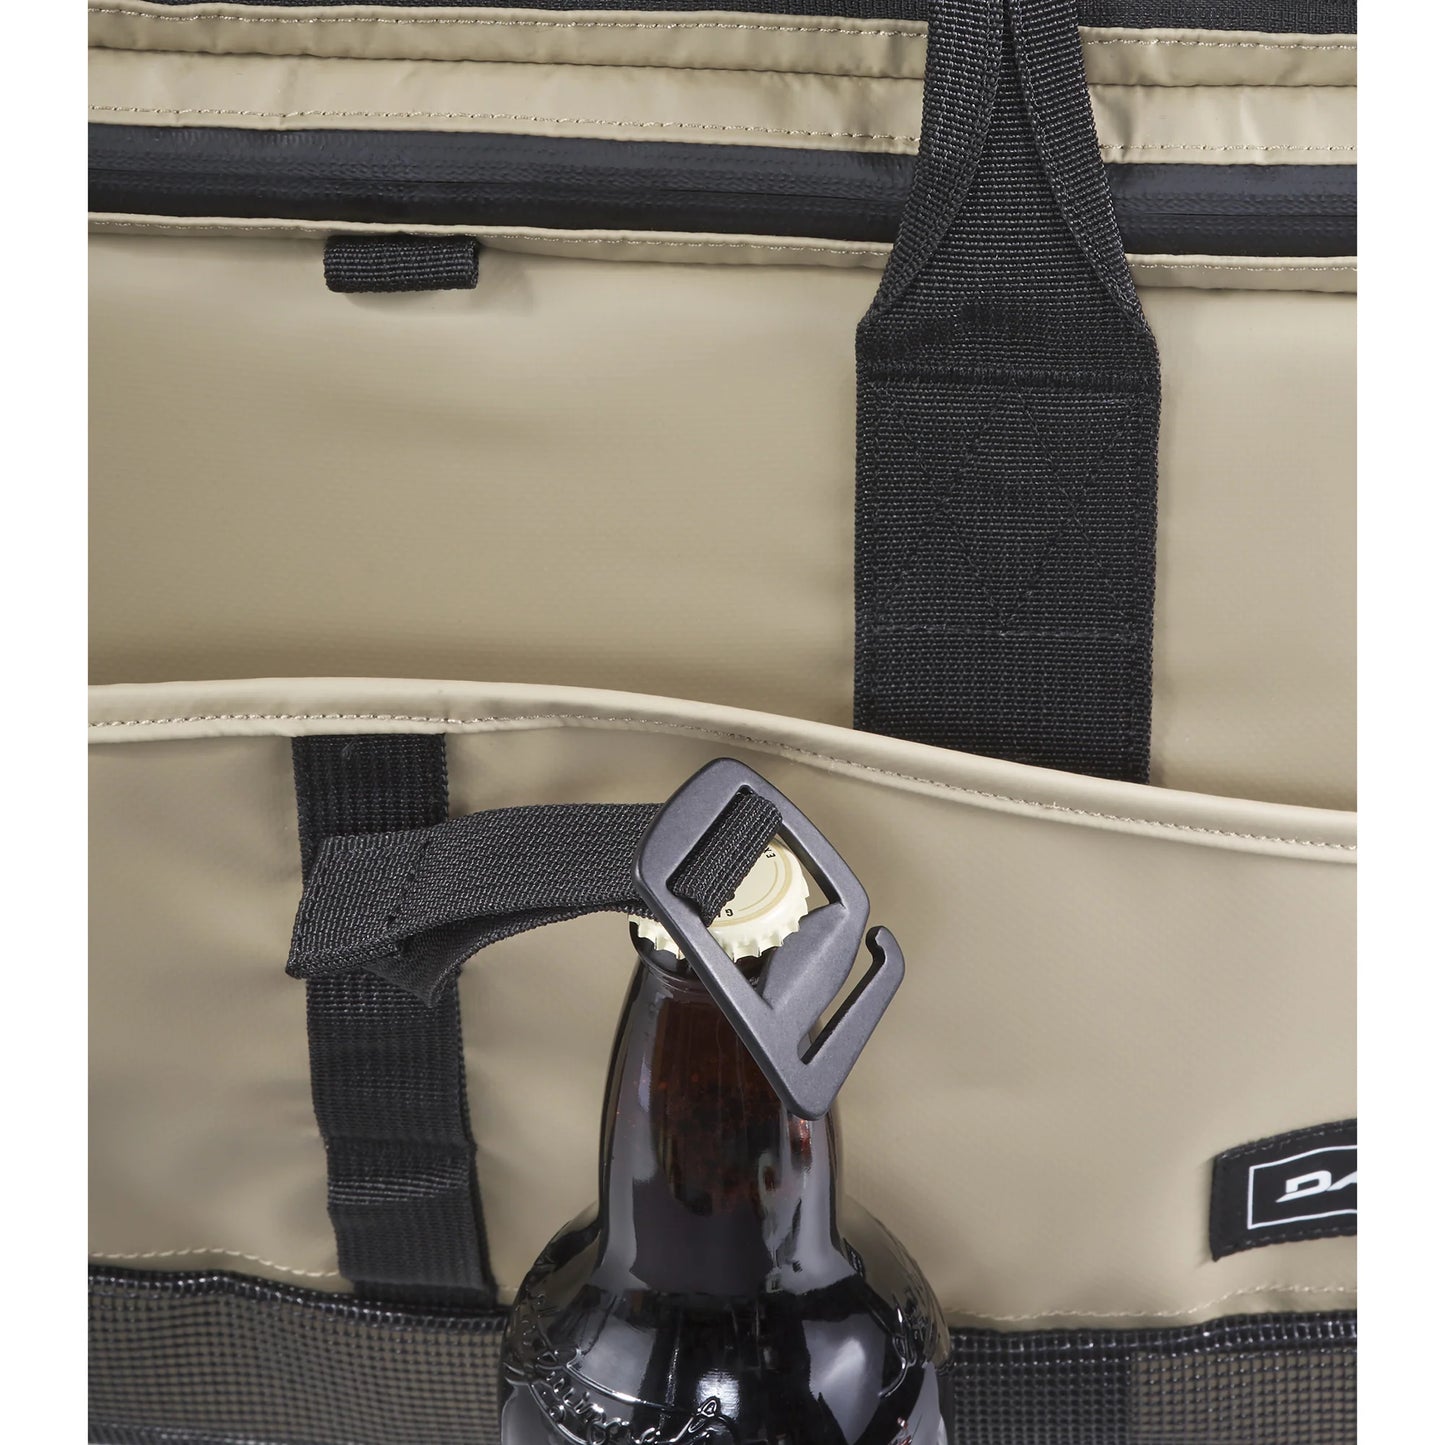 Load image into Gallery viewer, Dakine Cooler 50L 
